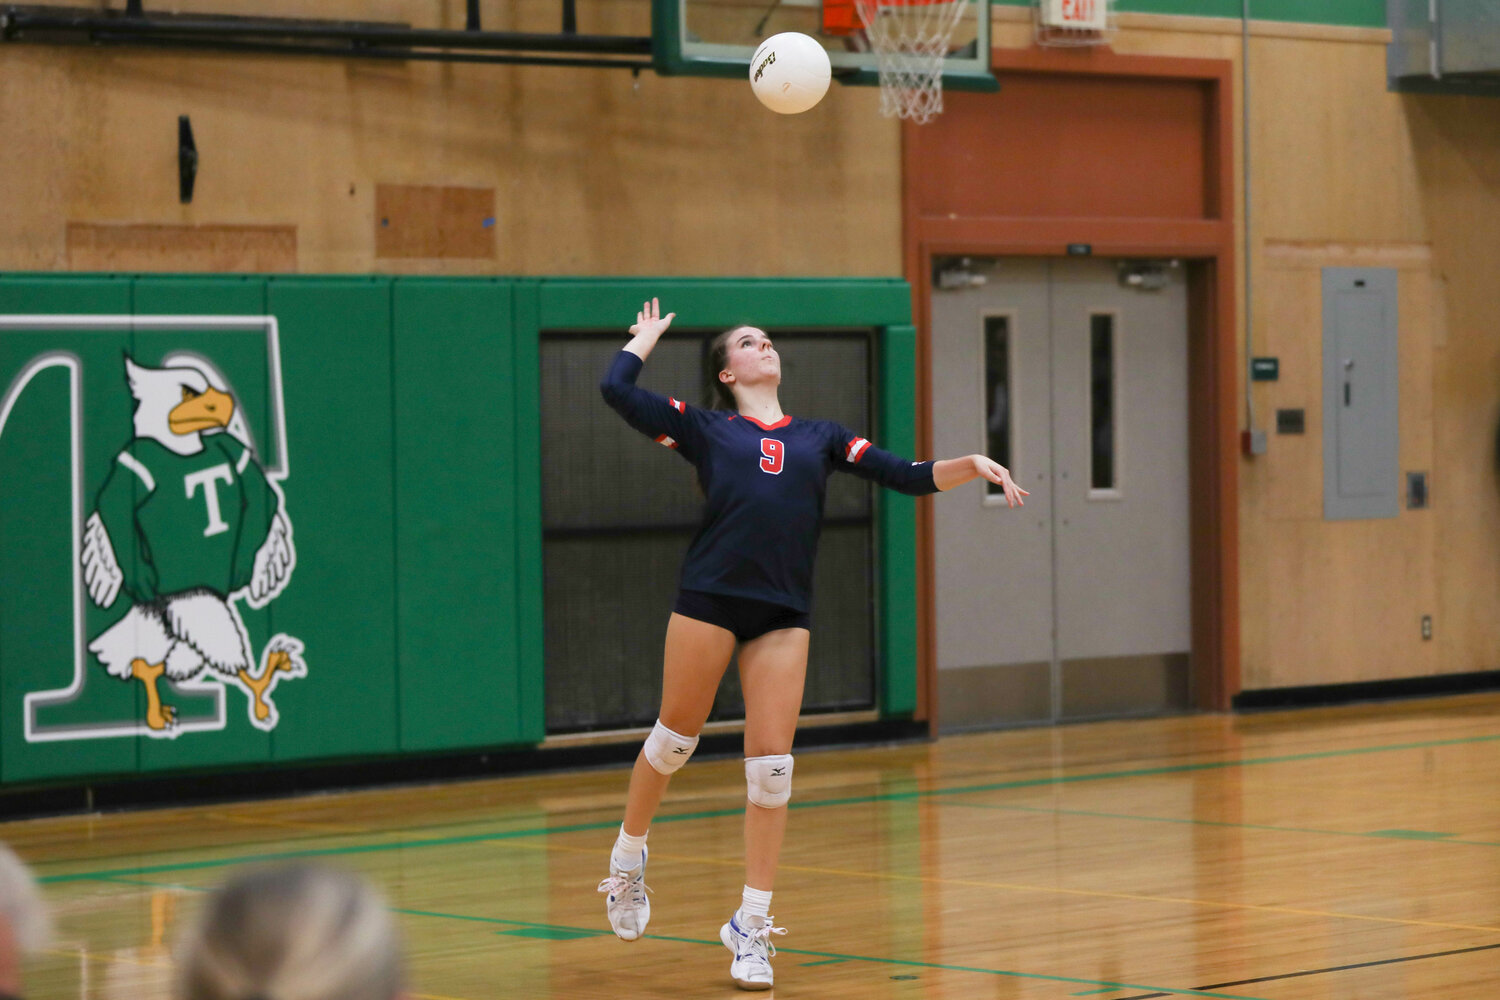 Lilly Kincaid serves during Black Hills' 3-2 win over R.A. Long in the first round of the 2A District 4 Tournament on Nov. 2 in Tumwater.